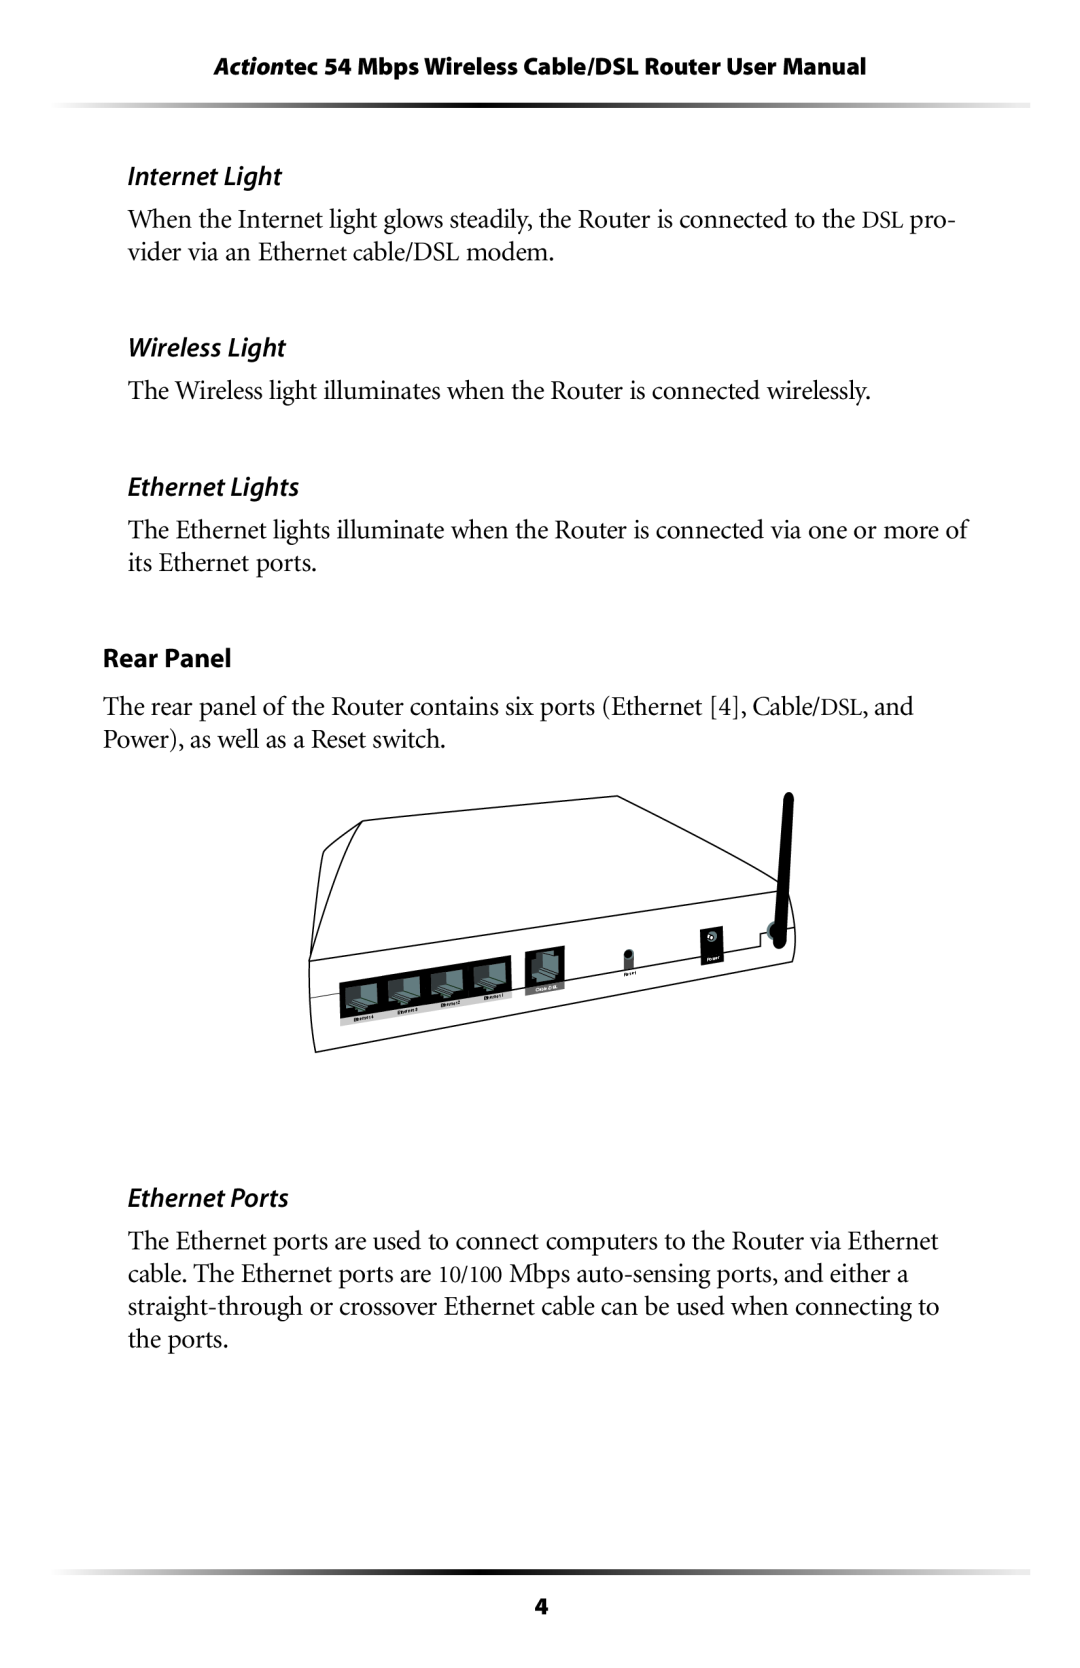 Actiontec electronic GT704WR user manual Internet Light, Wireless Light, Ethernet Lights, Ethernet Ports 